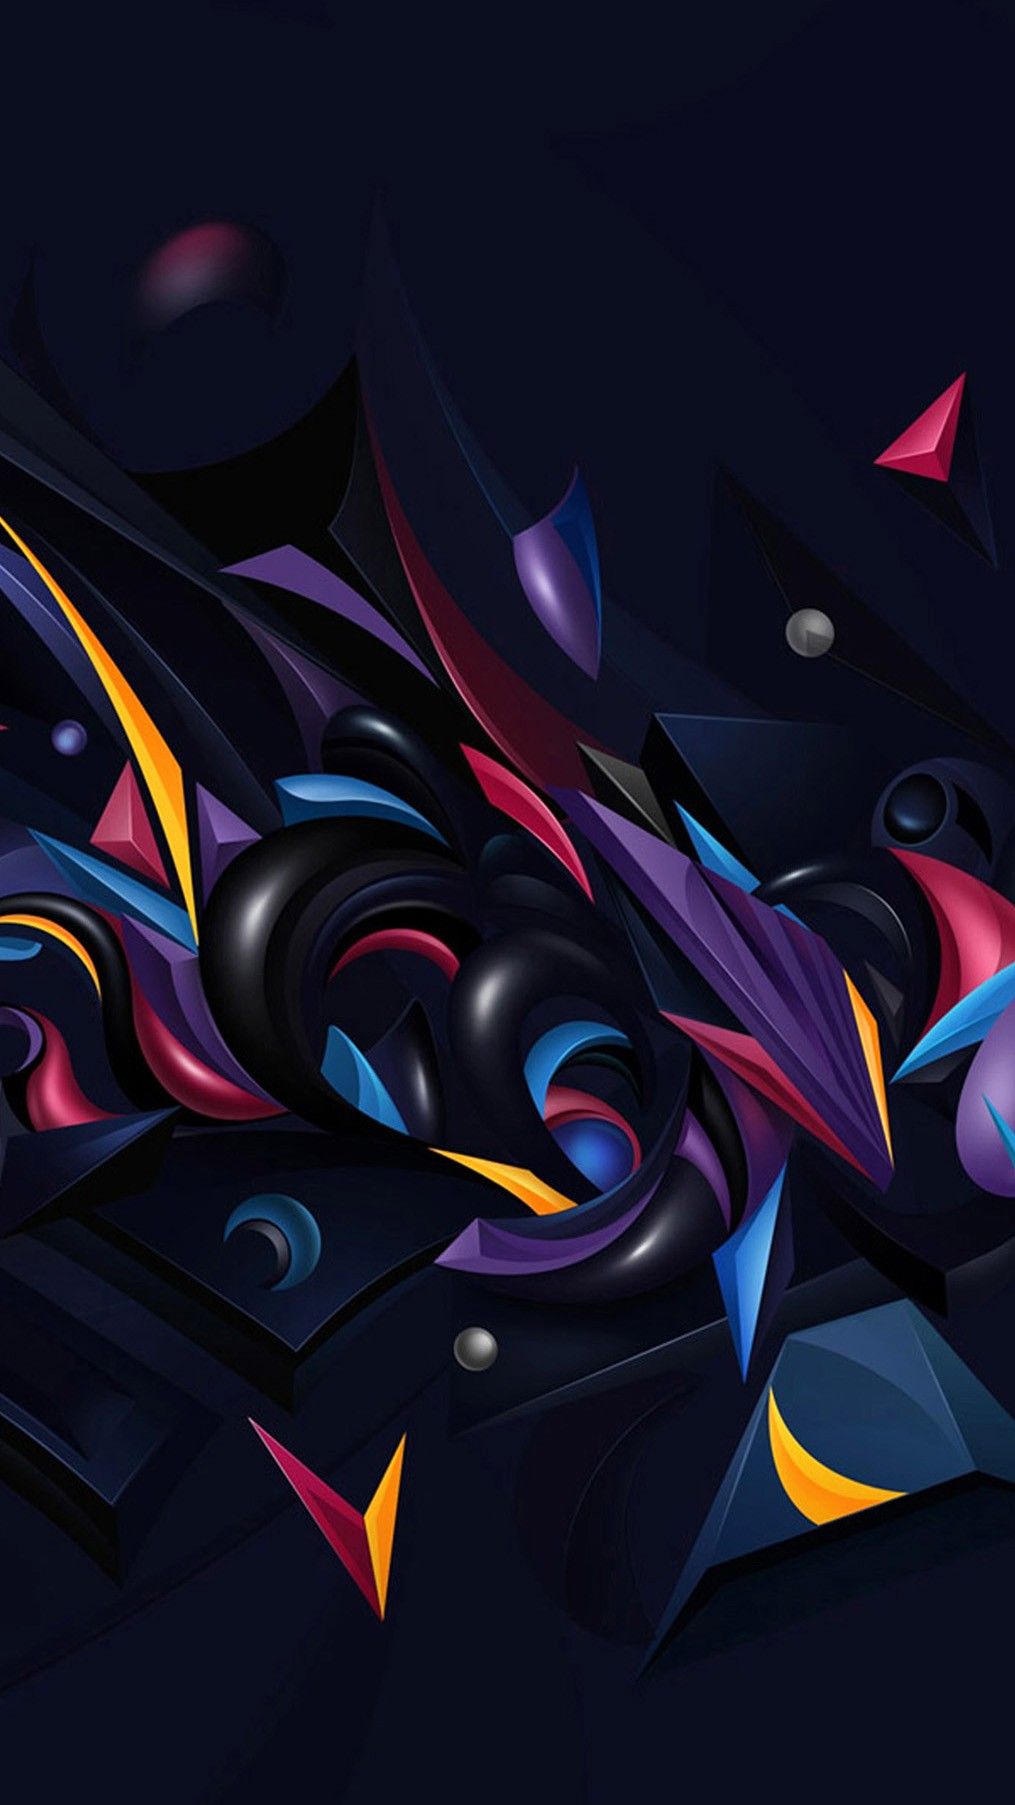 D Abstract Art Galaxy S Wallpaper, HD Artworks, Android